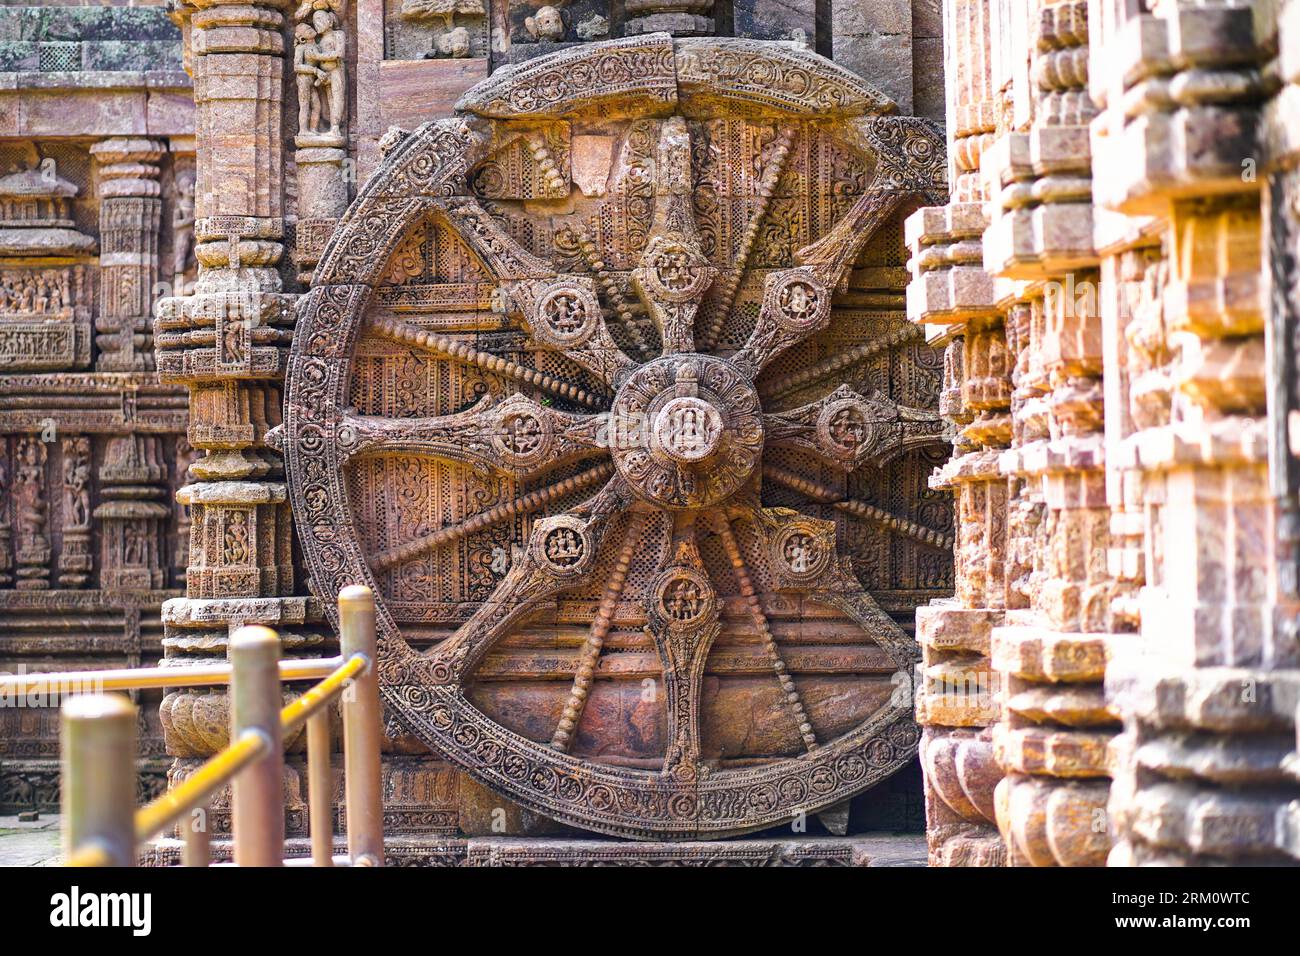 An antique sun wheel, depicting a chariot and sundial, sits in front of the Sun Temple in Konark, Odisha, India Stock Photo